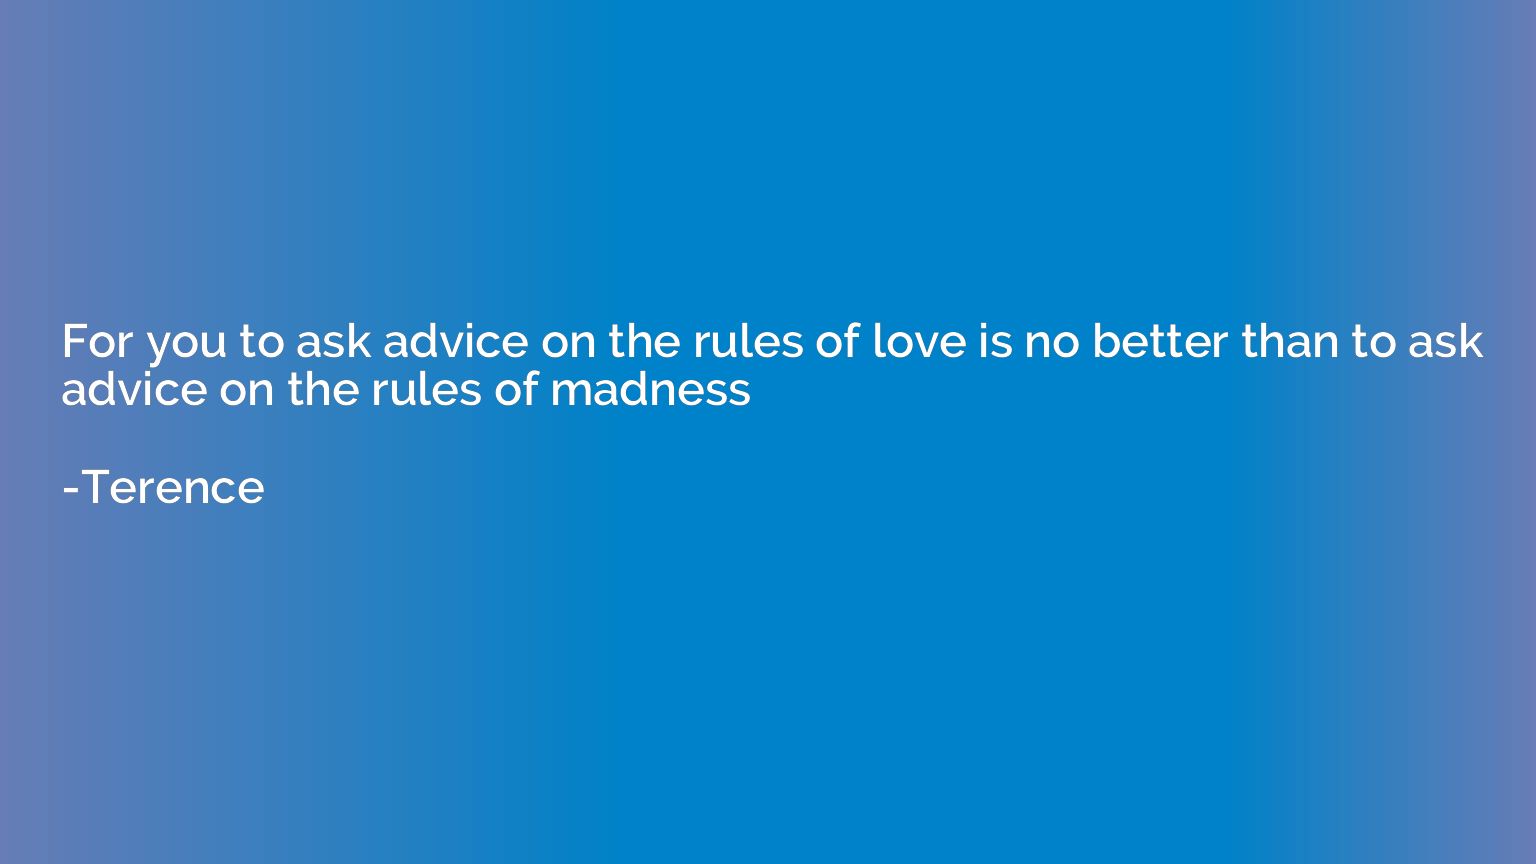 For you to ask advice on the rules of love is no better than